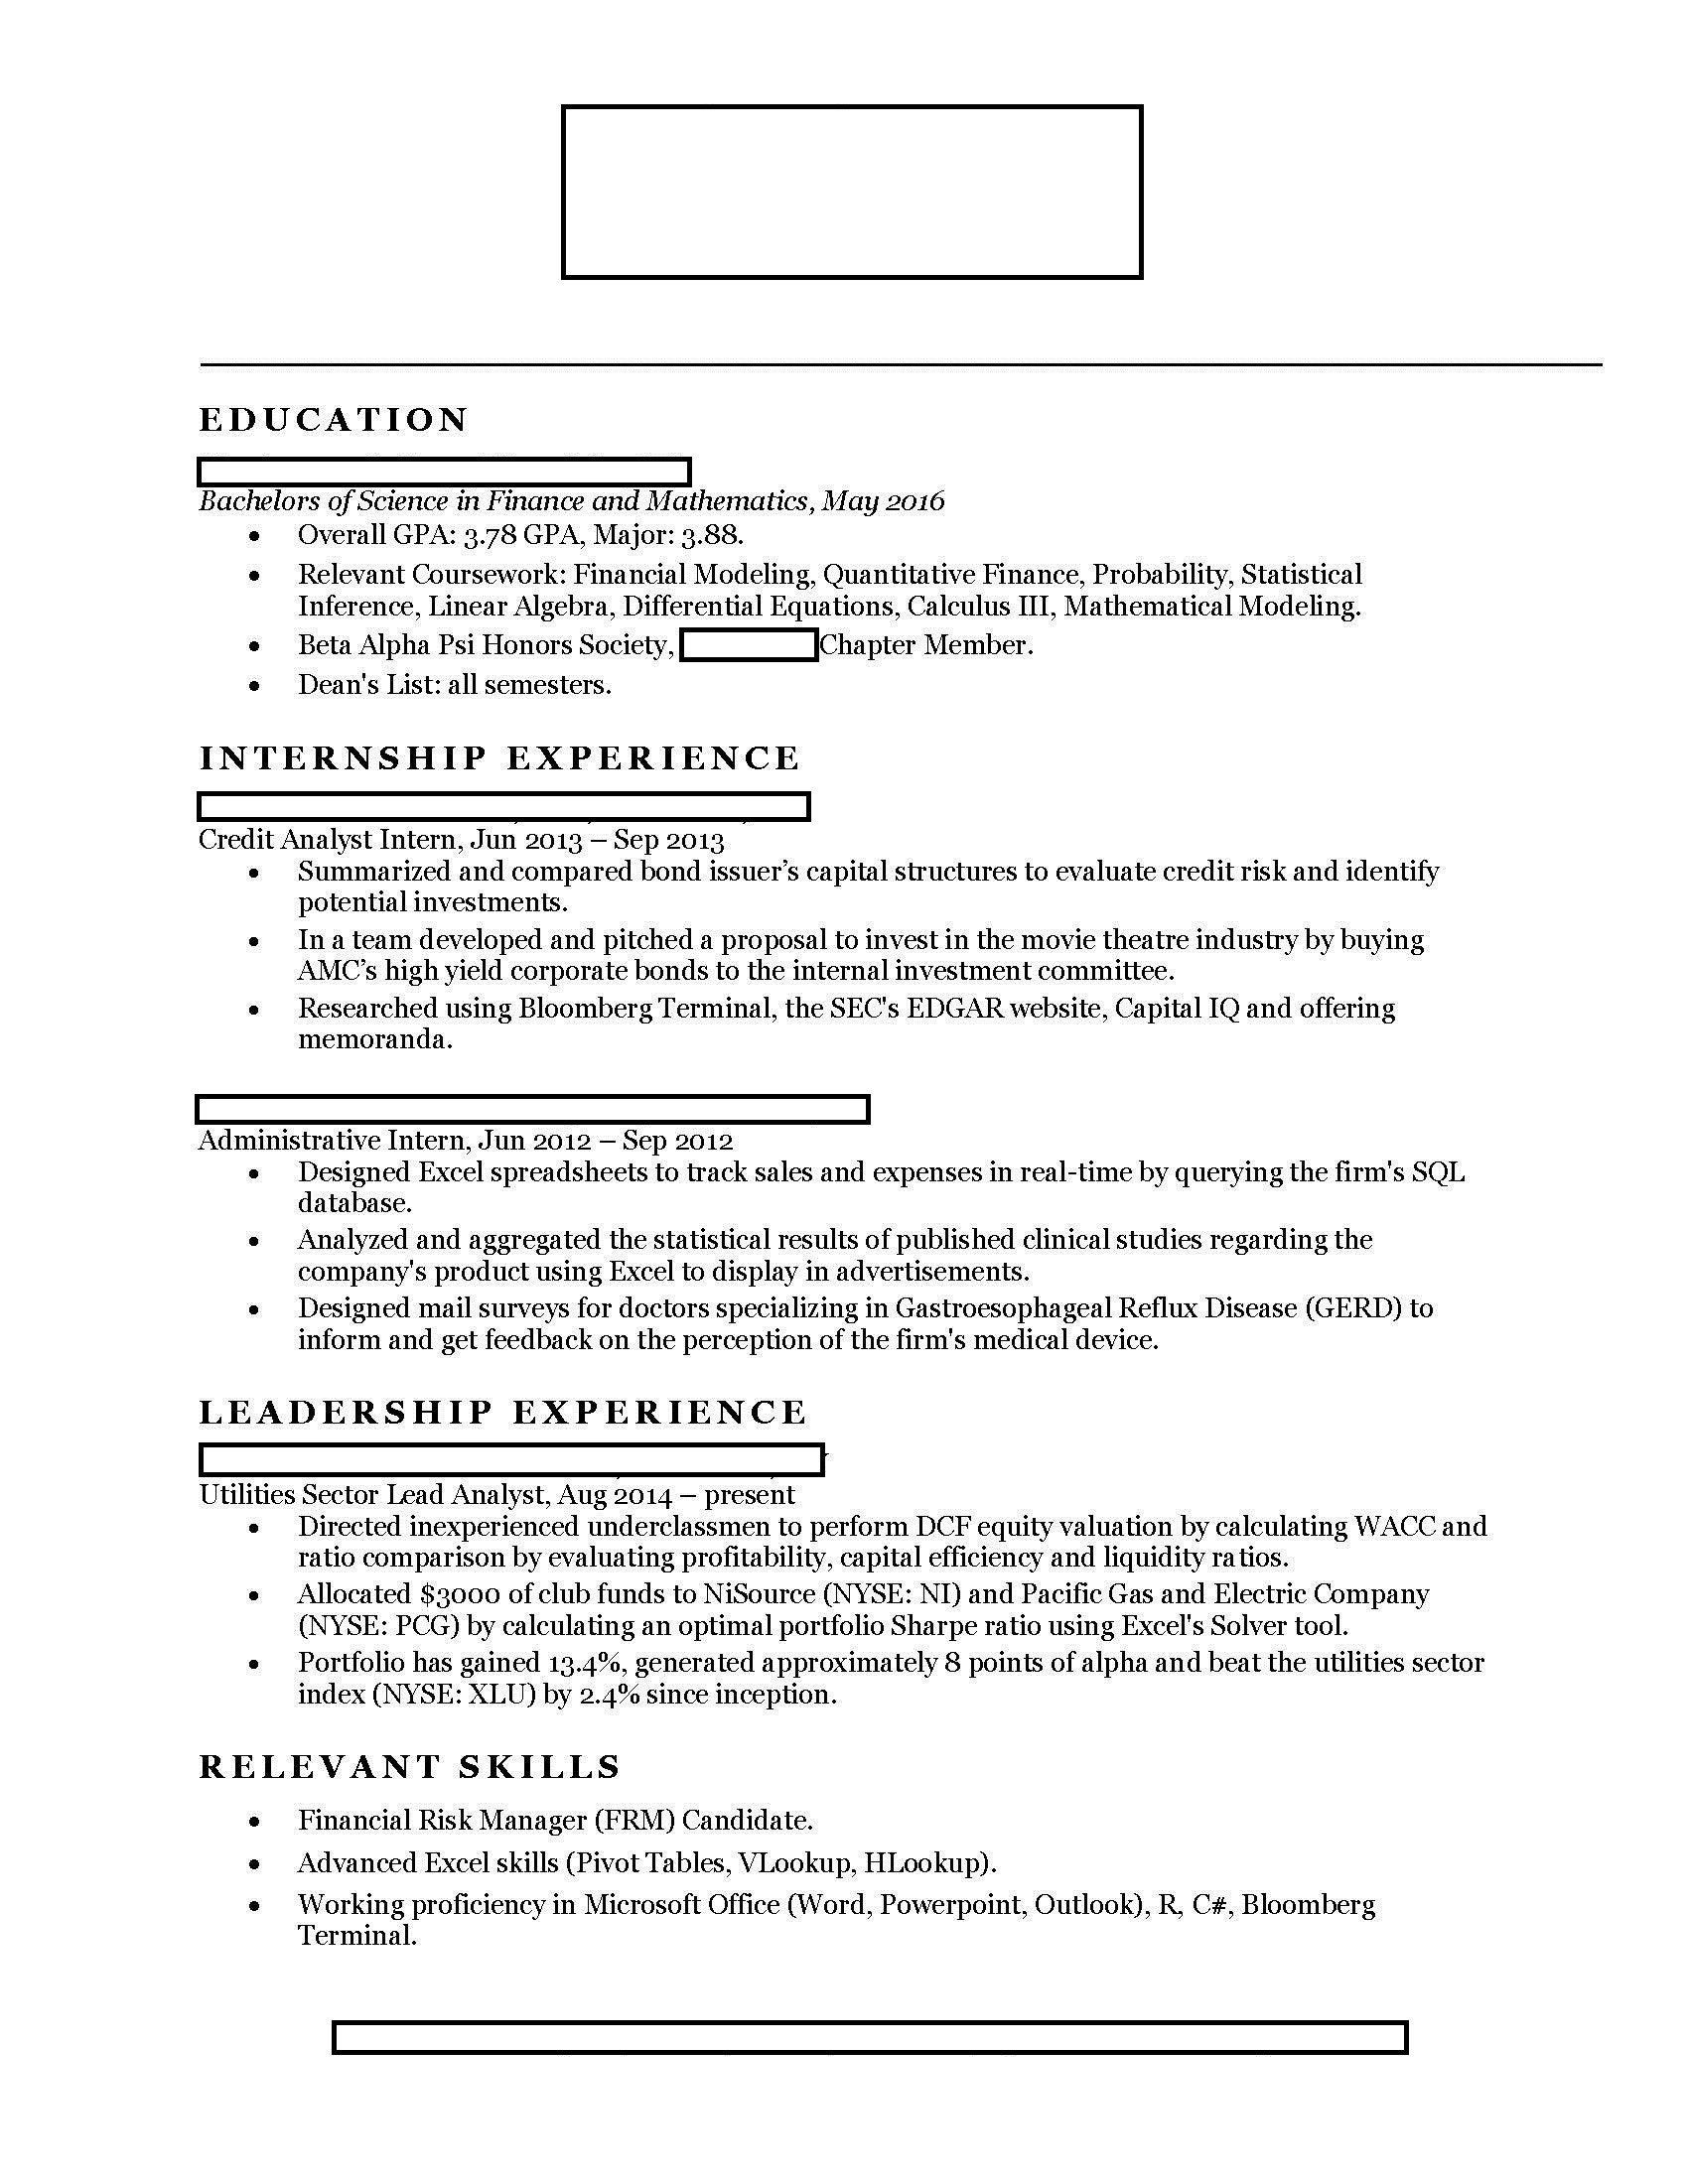 finance looking for internships in investment